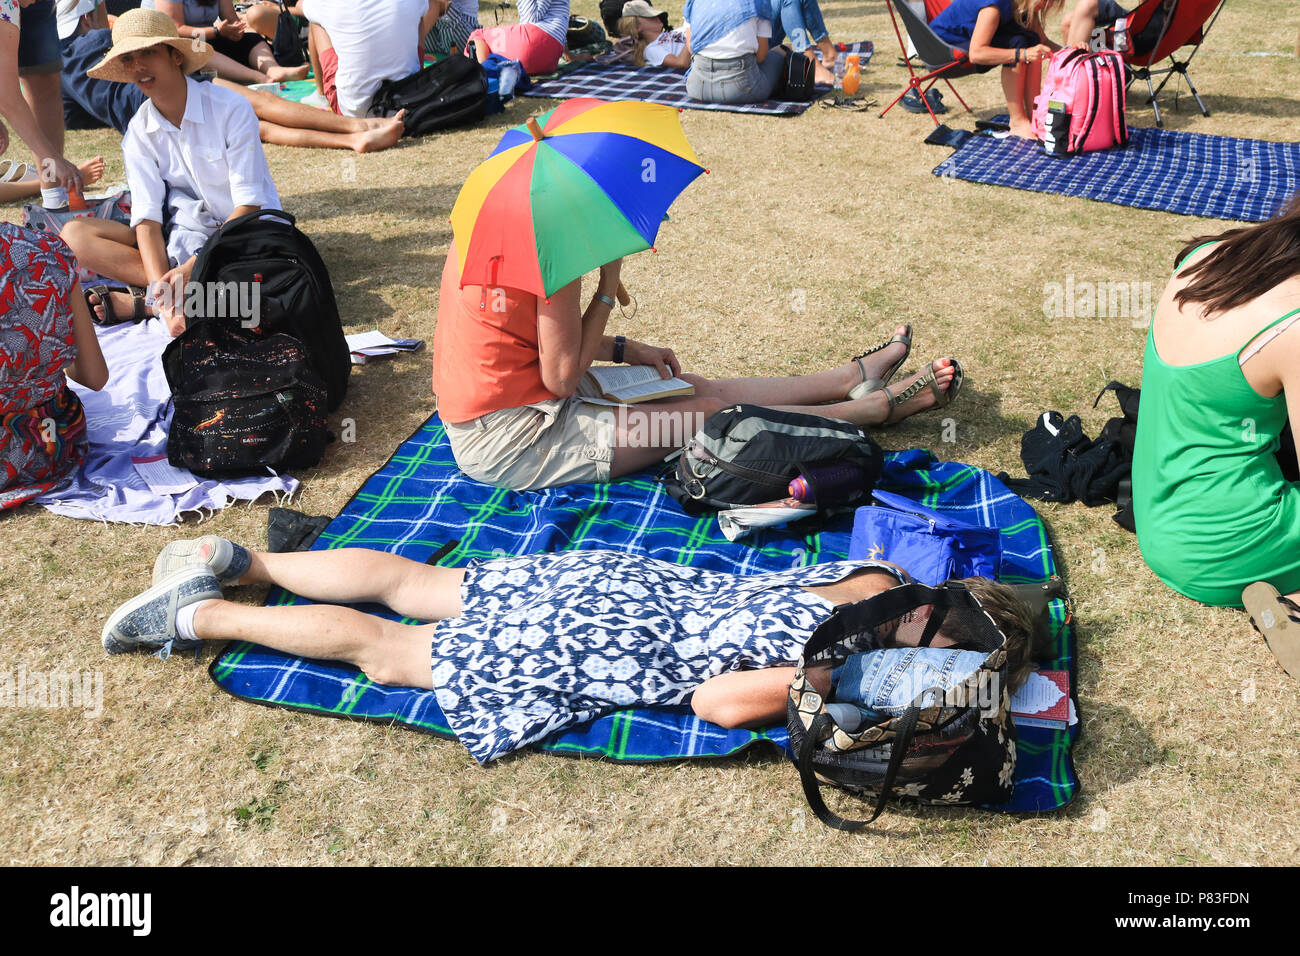 London 9th July 2018. Tennis fans queue in the hot sunshine on another sweltering humid day  to gain entry into the grounds of The All England club on what is known as 'Manic Monday as temperatures are expected to reach 30C, making it the 16th day in a row where temperatures have reached  more than 28C.' Credit: amer ghazzal/Alamy Live News Stock Photo